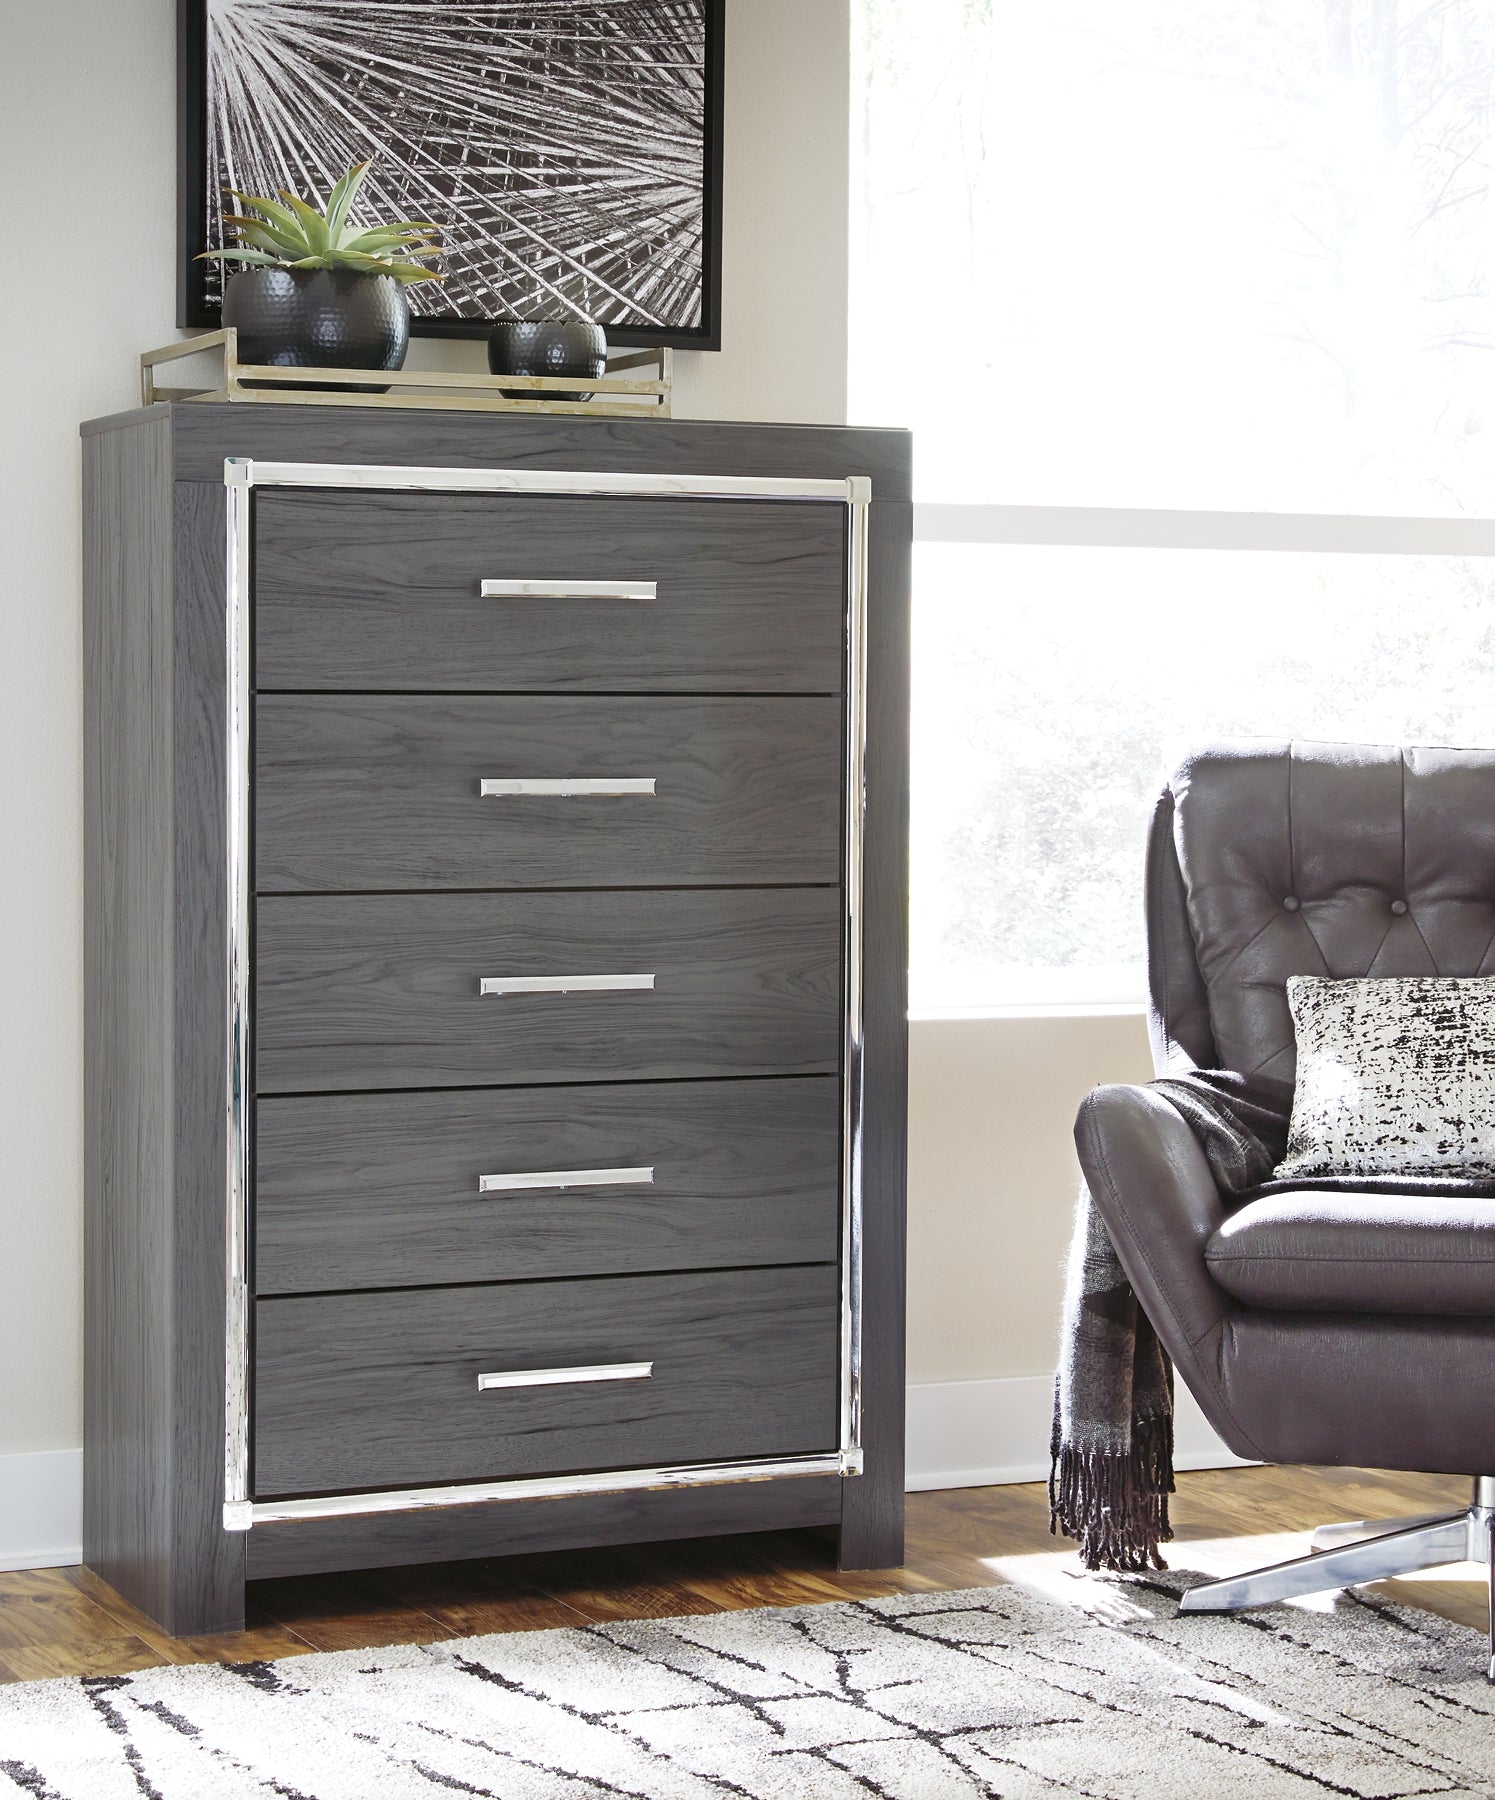 Lodanna Five Drawer Chest at Walker Mattress and Furniture Locations in Cedar Park and Belton TX.